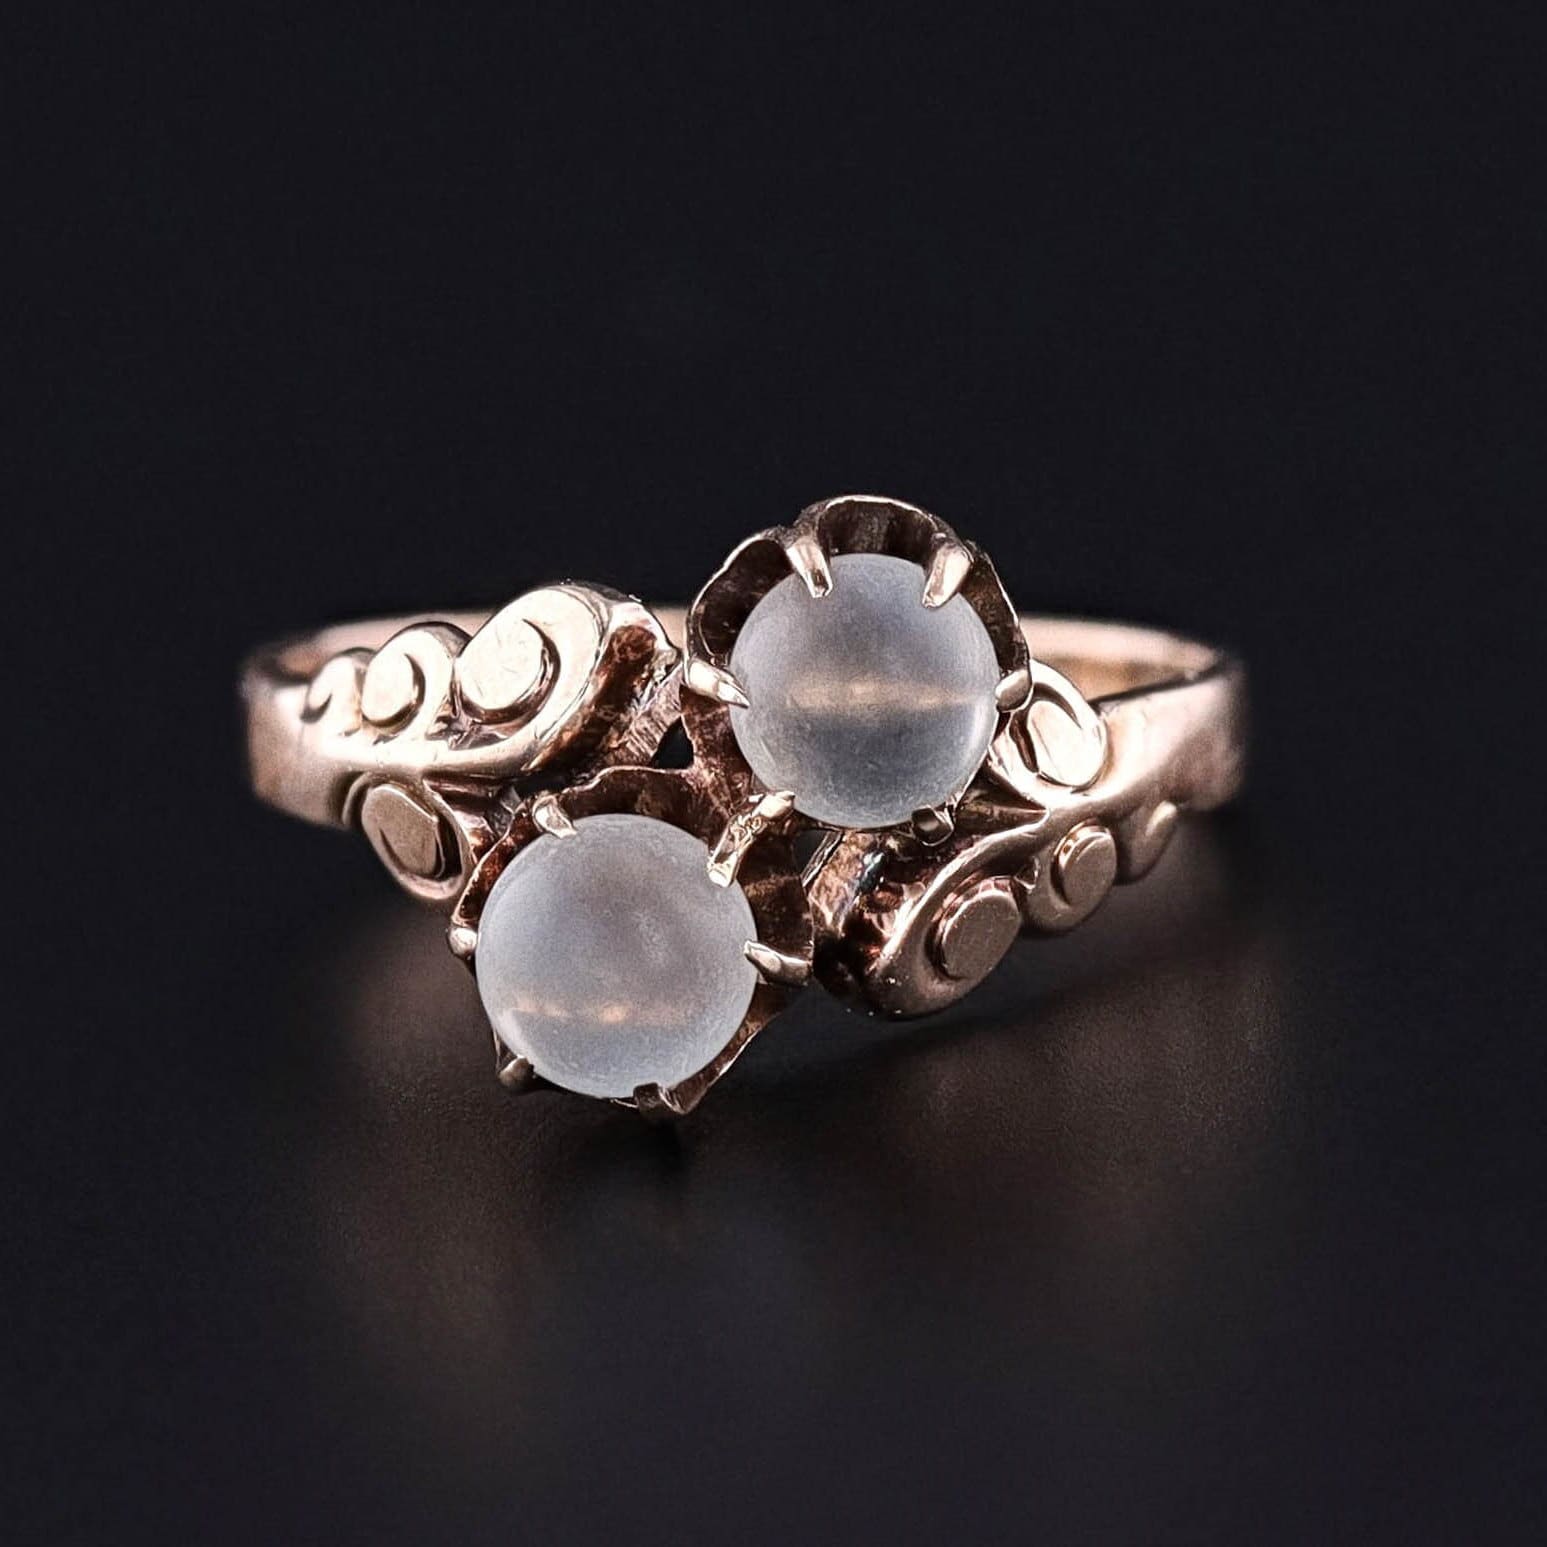 Antique Moonstone Bead Ring of 10k Gold